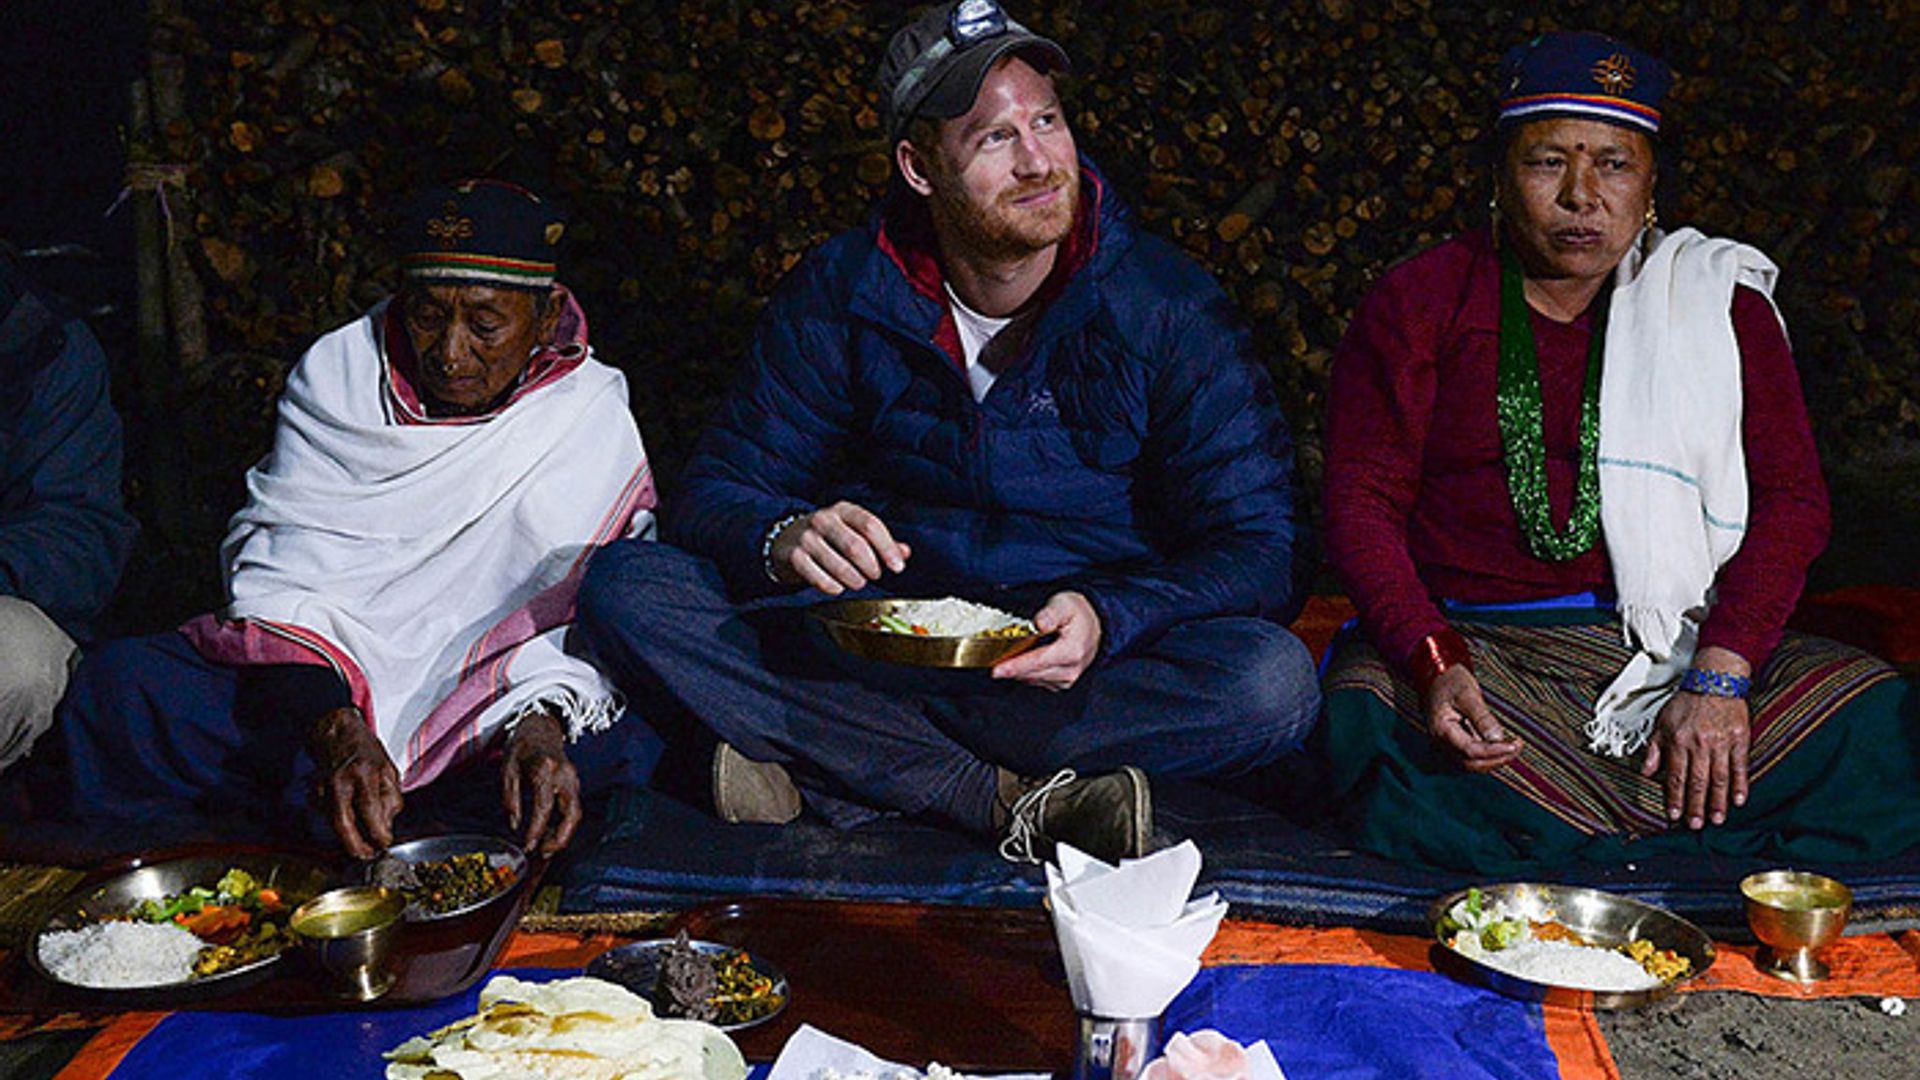 Just like Prince Harry in Nepal: My travel experience fit for a royal